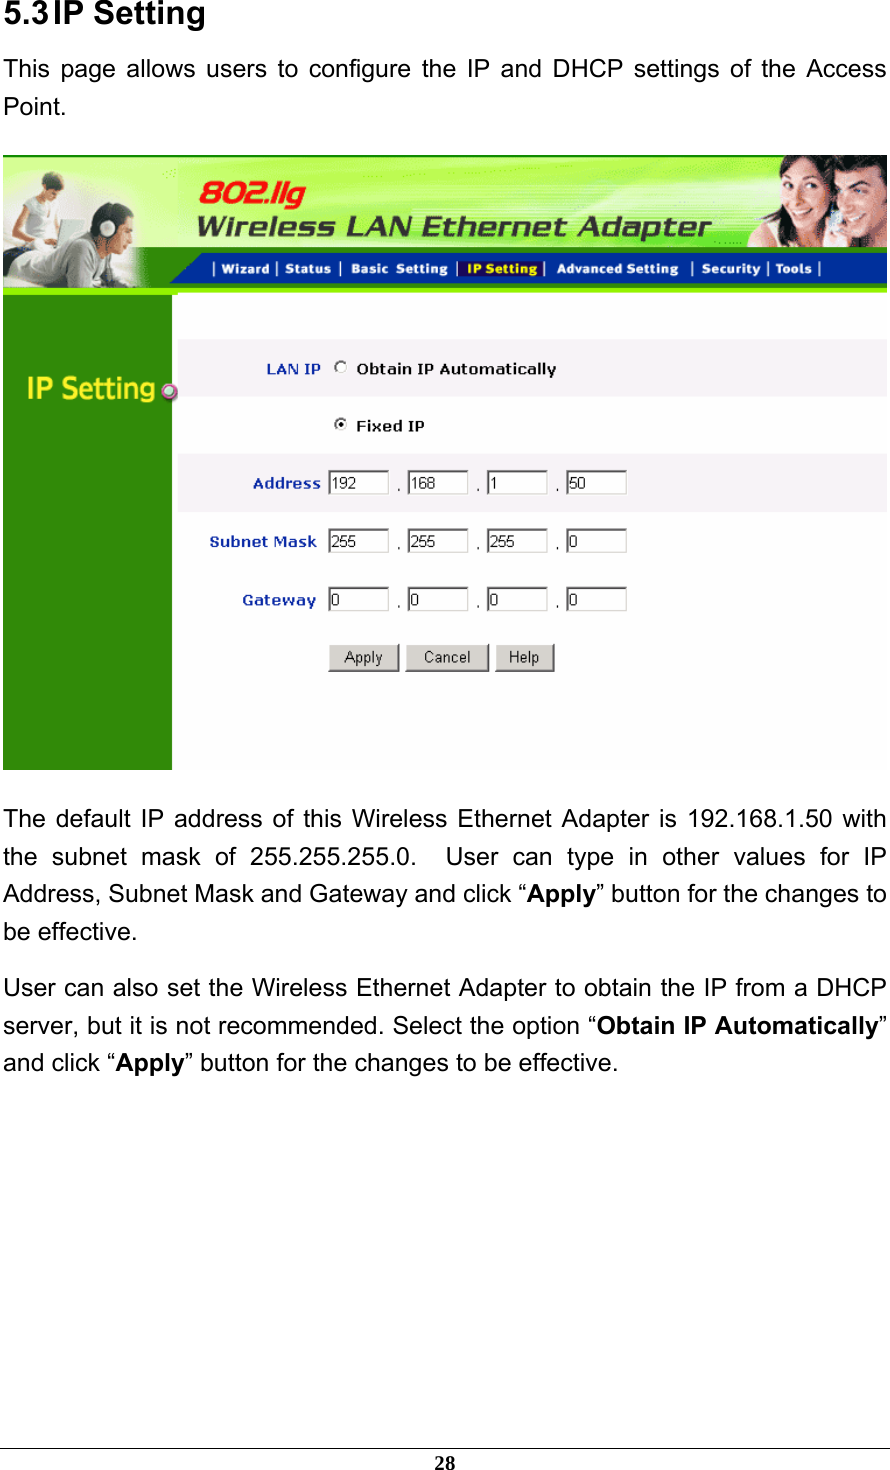 5.3 IP  Setting This page allows users to configure the IP and DHCP settings of the Access Point.  The default IP address of this Wireless Ethernet Adapter is 192.168.1.50 with the subnet mask of 255.255.255.0.  User can type in other values for IP Address, Subnet Mask and Gateway and click “Apply” button for the changes to be effective.   User can also set the Wireless Ethernet Adapter to obtain the IP from a DHCP server, but it is not recommended. Select the option “Obtain IP Automatically” and click “Apply” button for the changes to be effective.    28 